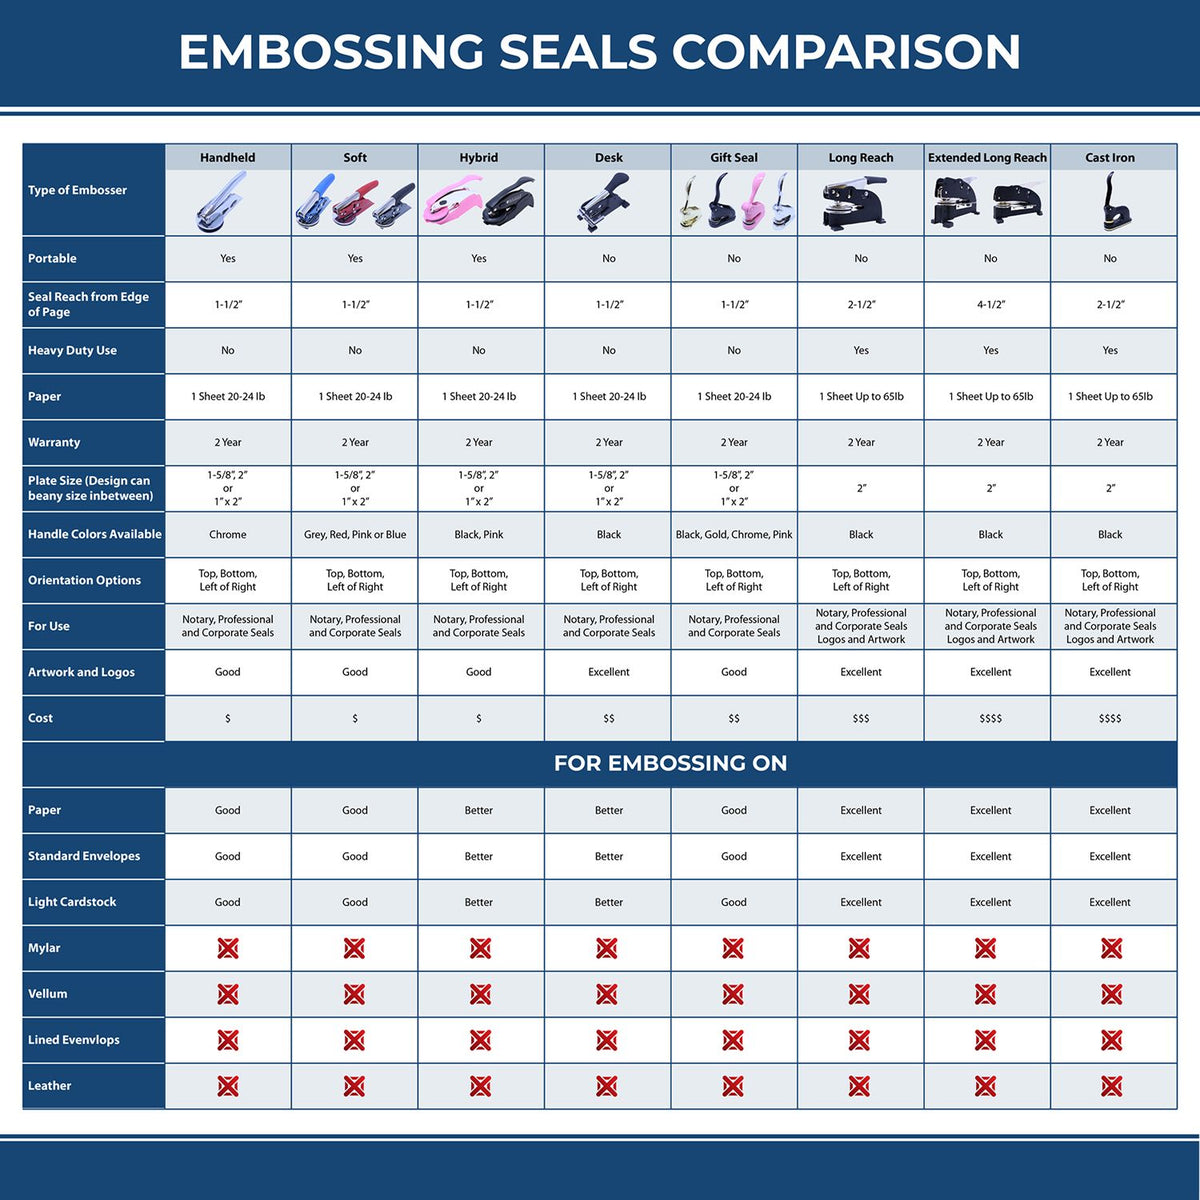 A comparison chart for the different types of mount models available for the Handheld Guam Land Surveyor Seal.